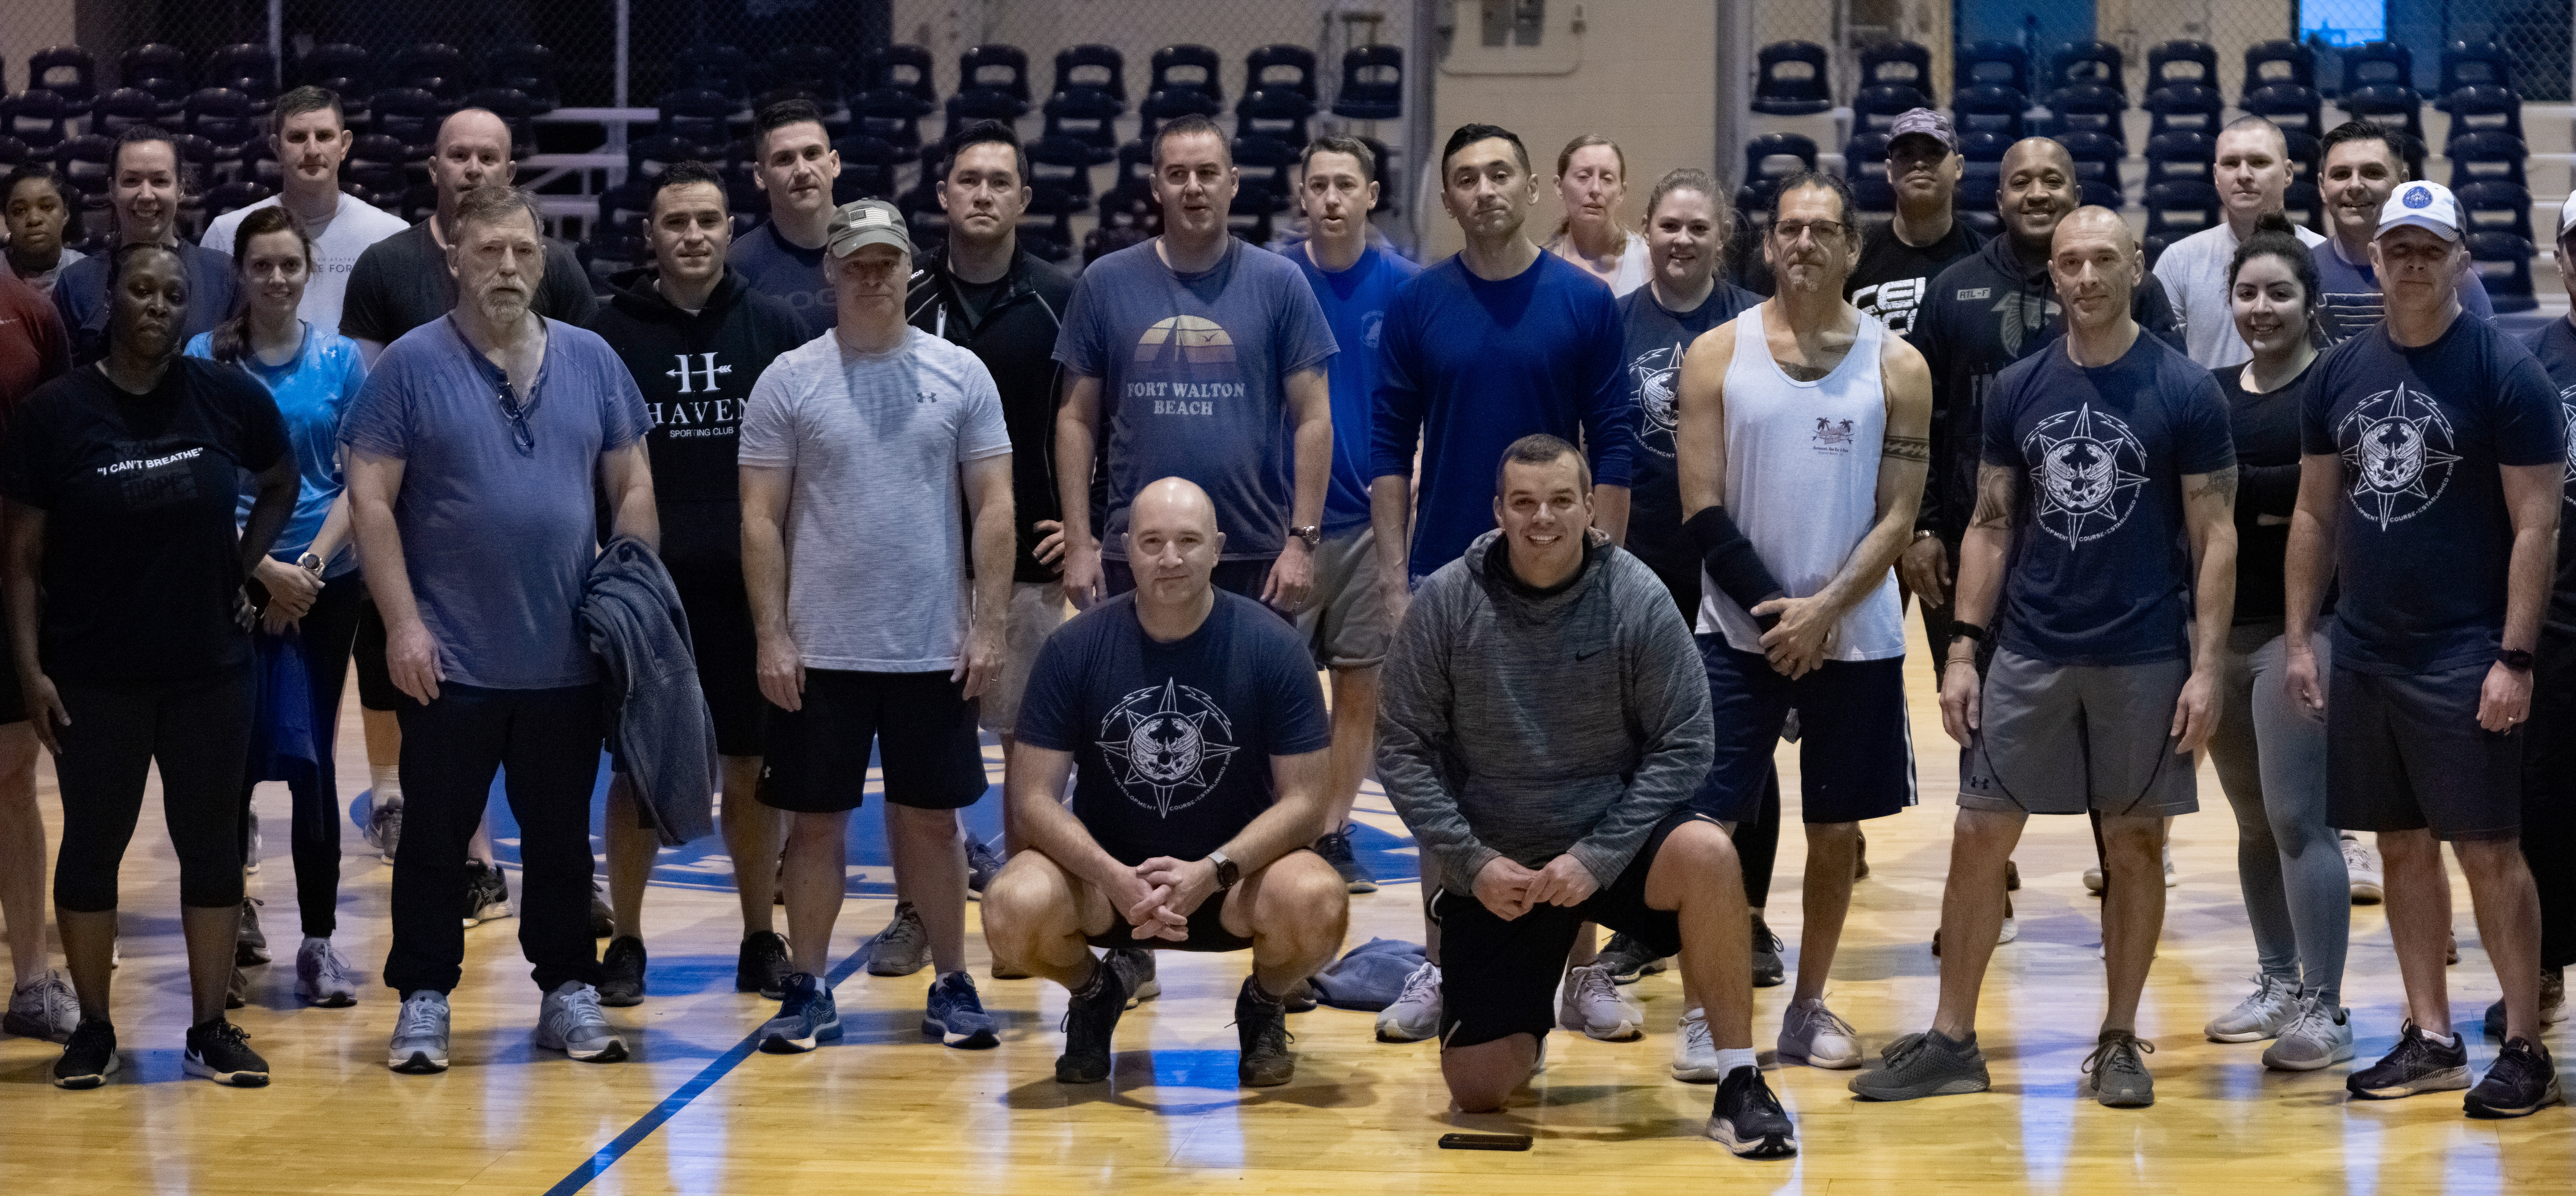 Leadership Development Course hosts Valor Workout honoring fallen > Maxwell  Air Force Base > Display